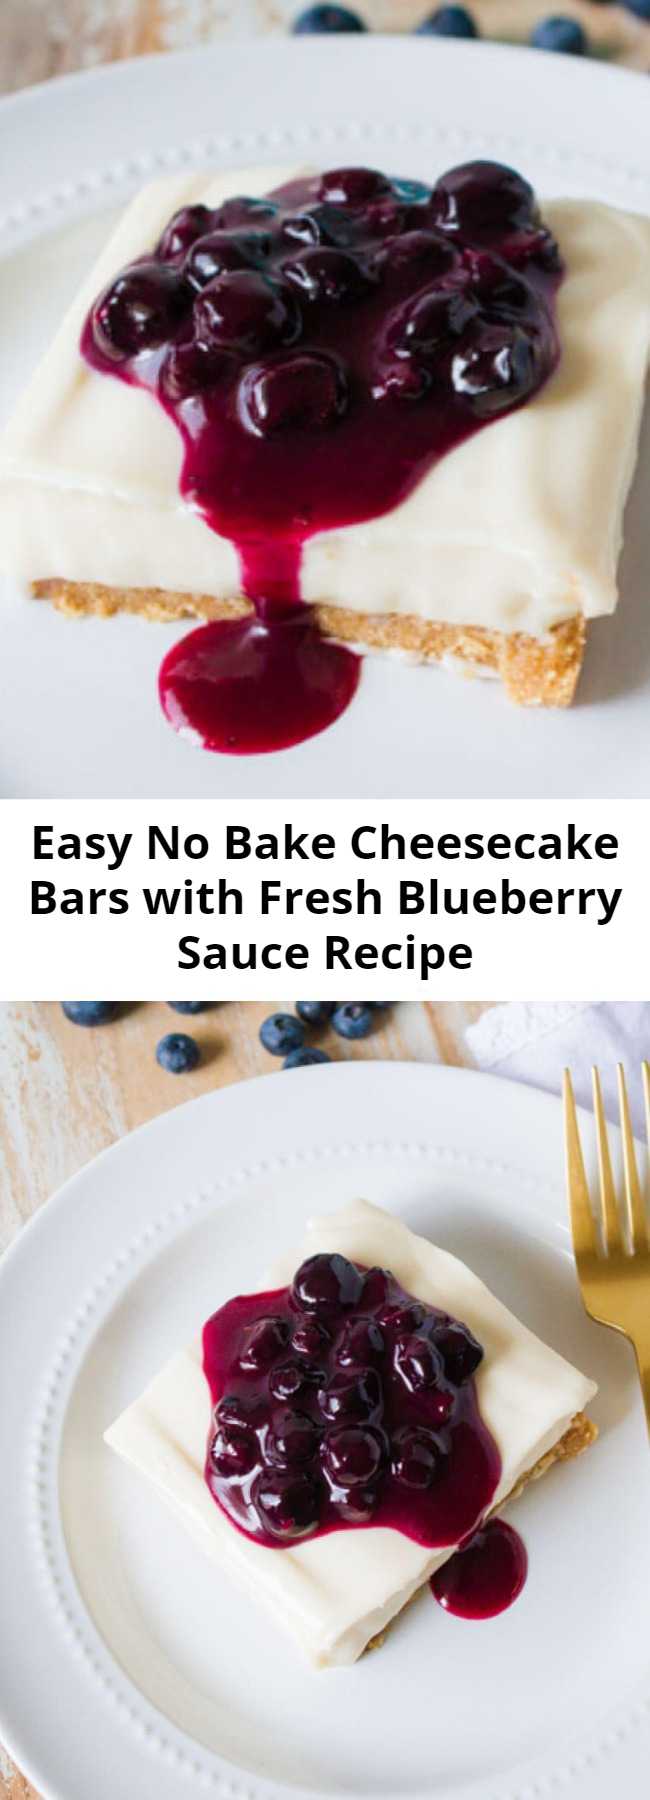 Easy No Bake Cheesecake Bars with Fresh Blueberry Sauce Recipe - This creamy No Bake Cheesecake Bars recipe has a thick graham cracker crust and is topped with a sweet blueberry sauce - SO easy and delicious!